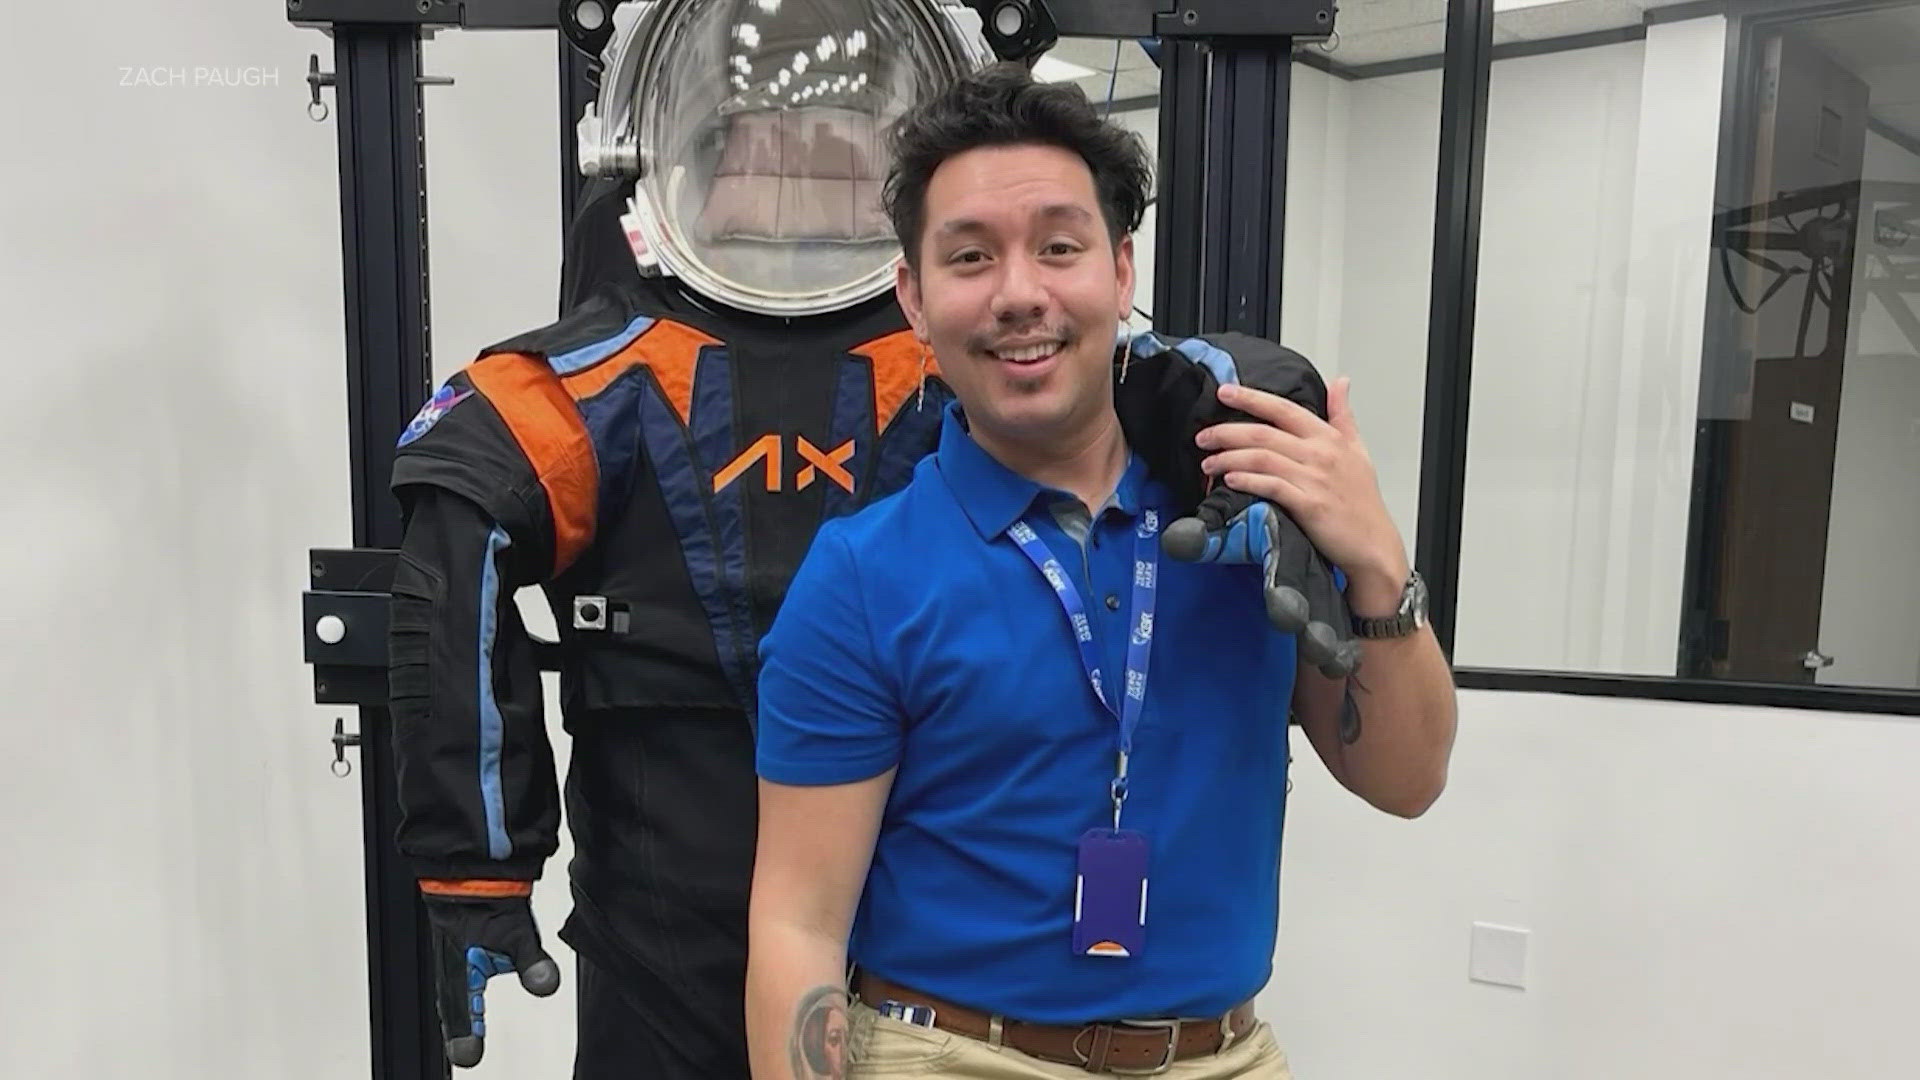 Zach Paugh got his start designing costumes backstage in Las Vegas. Now, he's one of several people helping to build a next-generation spacesuit.